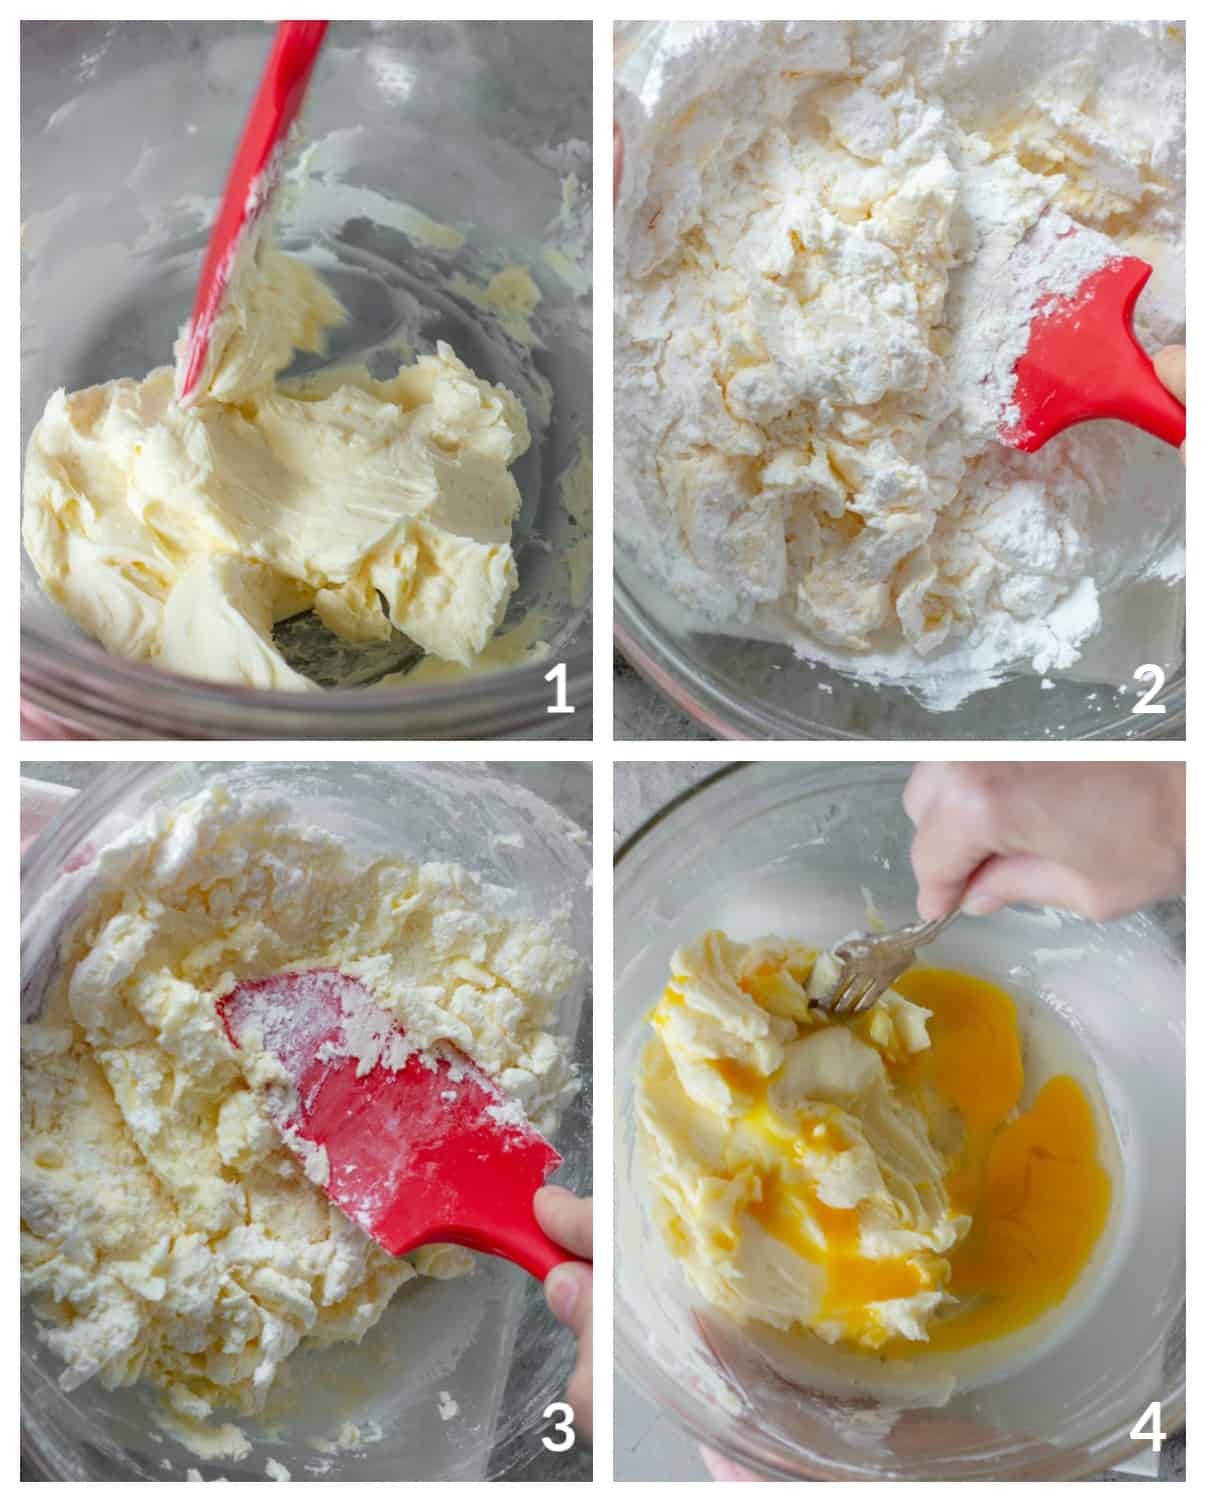 Image collage showing steps for making sweet pie dough in glass bowl with red spatula